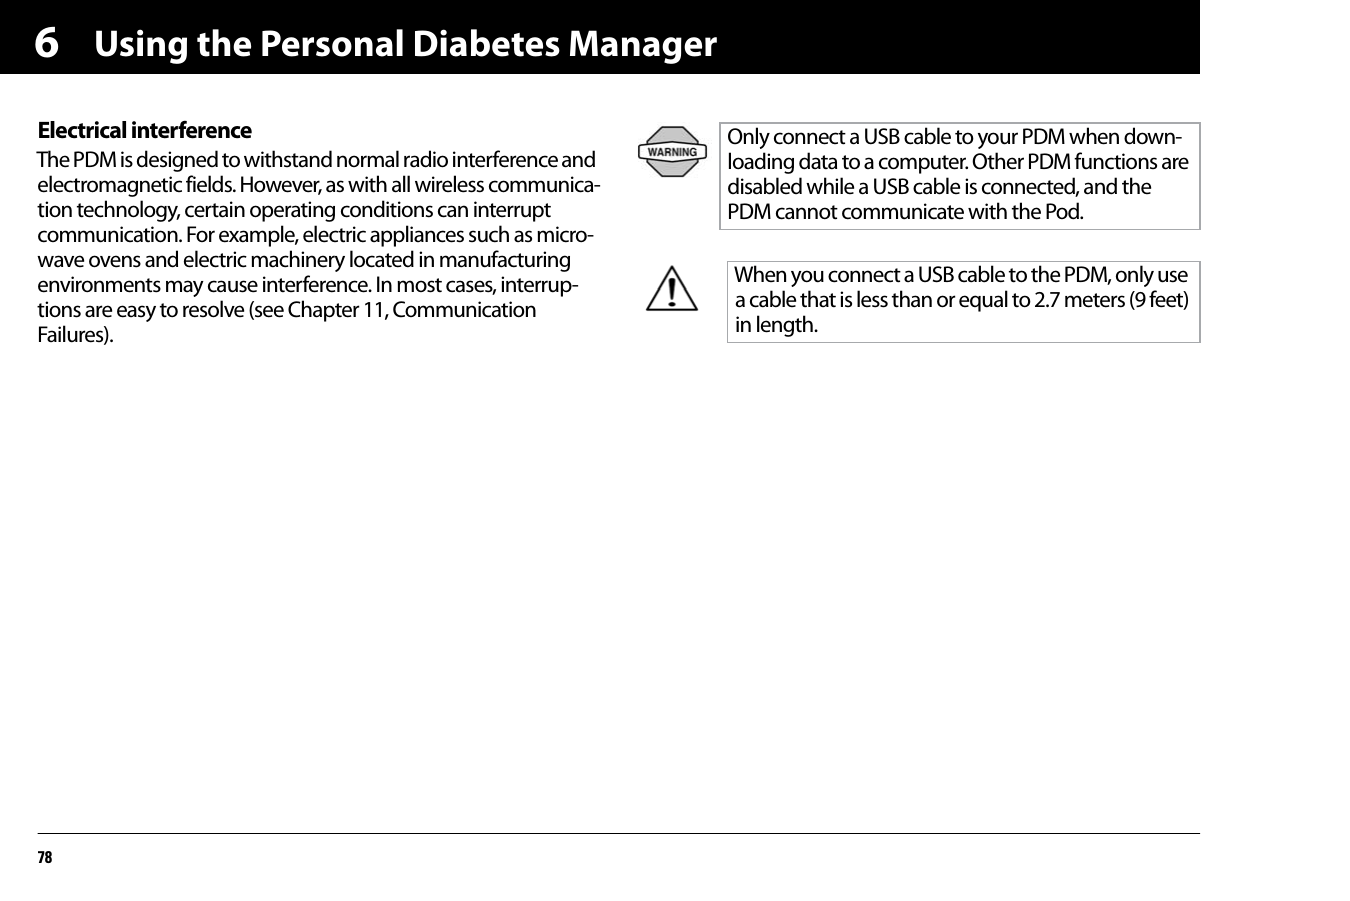 Using the Personal Diabetes Manager786Electrical interferenceThe PDM is designed to withstand normal radio interference and electromagnetic fields. However, as with all wireless communica-tion technology, certain operating conditions can interrupt communication. For example, electric appliances such as micro-wave ovens and electric machinery located in manufacturing environments may cause interference. In most cases, interrup-tions are easy to resolve (see Chapter 11, Communication Failures).Only connect a USB cable to your PDM when down-loading data to a computer. Other PDM functions are disabled while a USB cable is connected, and the PDM cannot communicate with the Pod.When you connect a USB cable to the PDM, only use a cable that is less than or equal to 2.7 meters (9 feet) in length.